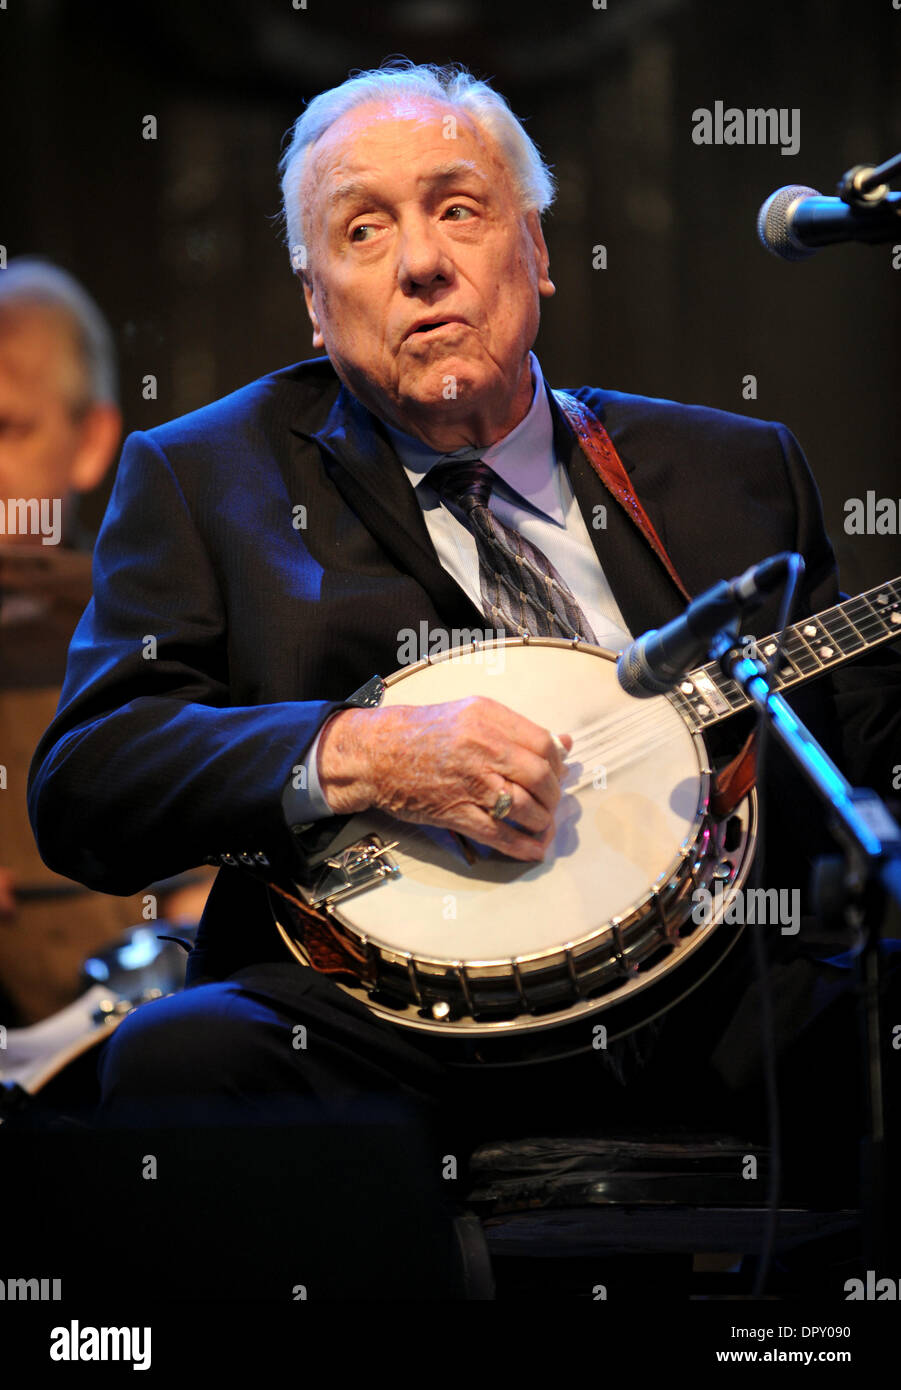 Apr 25, 2009 - Indio, California, USA - Legendary Banjoist EARL SCRUGGS performs live at the Empire Polo Field as part of the 2009 Stagecoach Country Music Festival. (Credit Image: © Jason Moore/ZUMA Press) Stock Photo